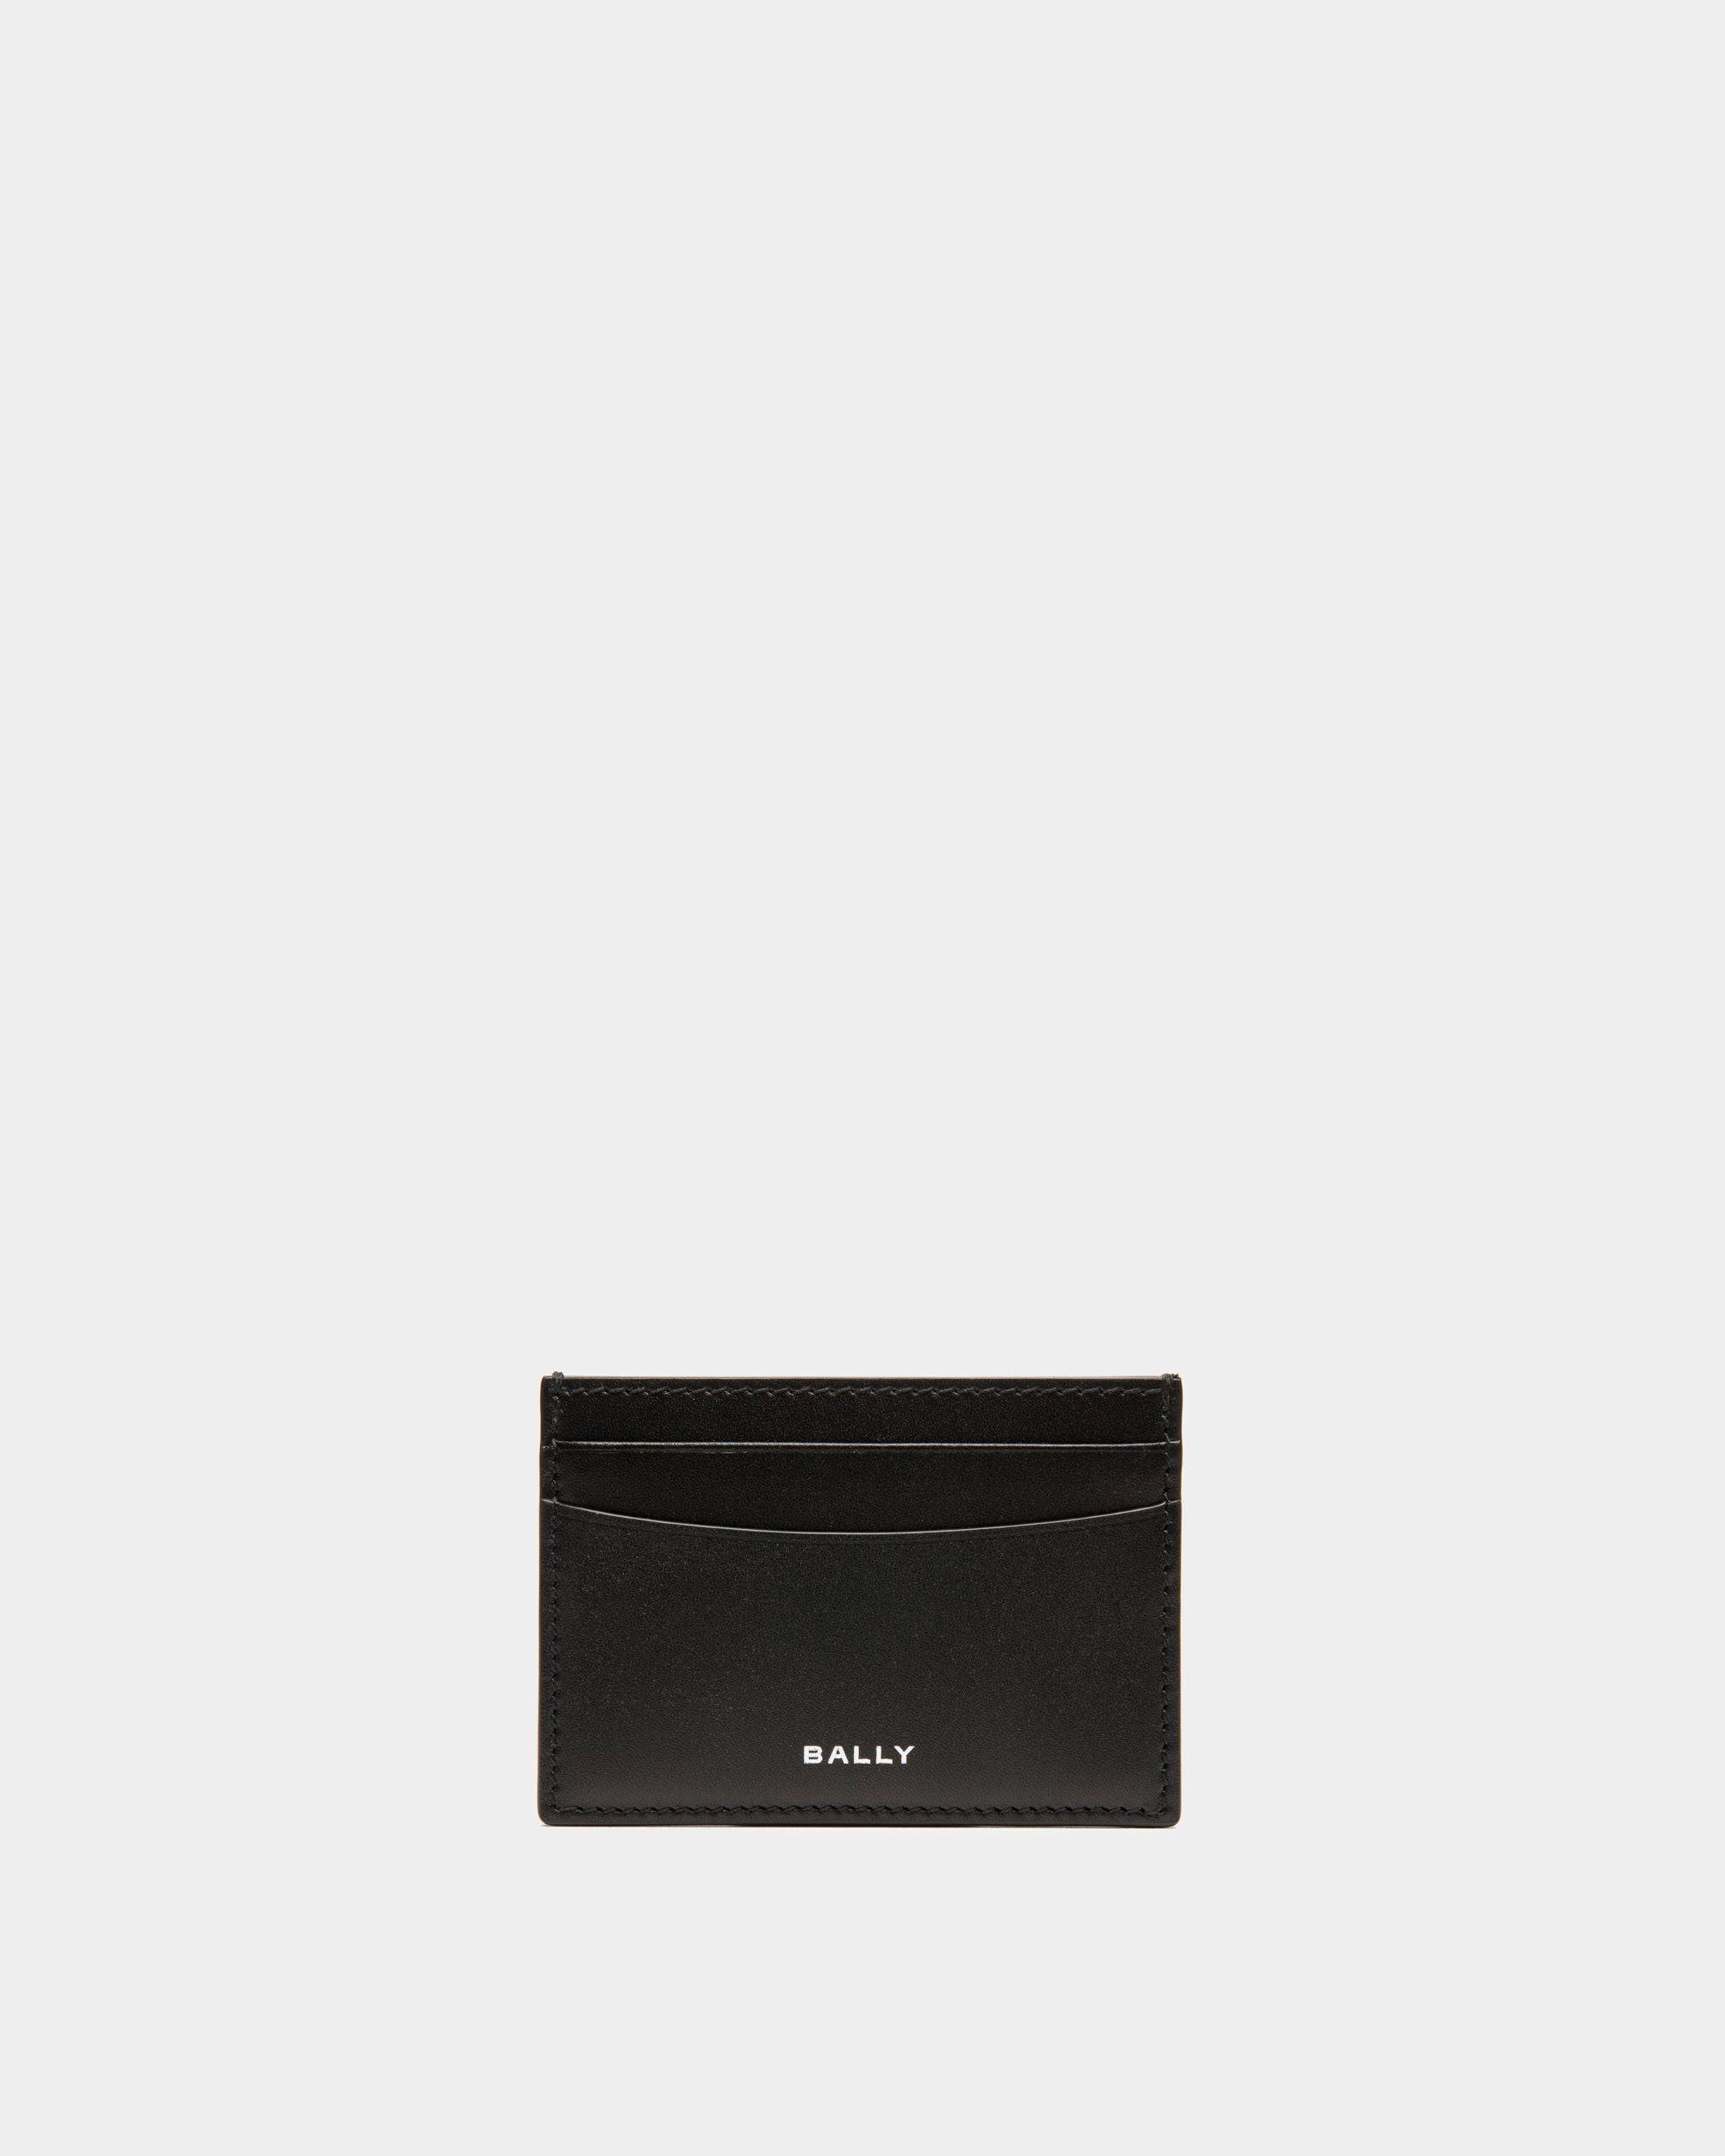 Men's Leather Wallets, Card Holders & Coin Pouches | Bally